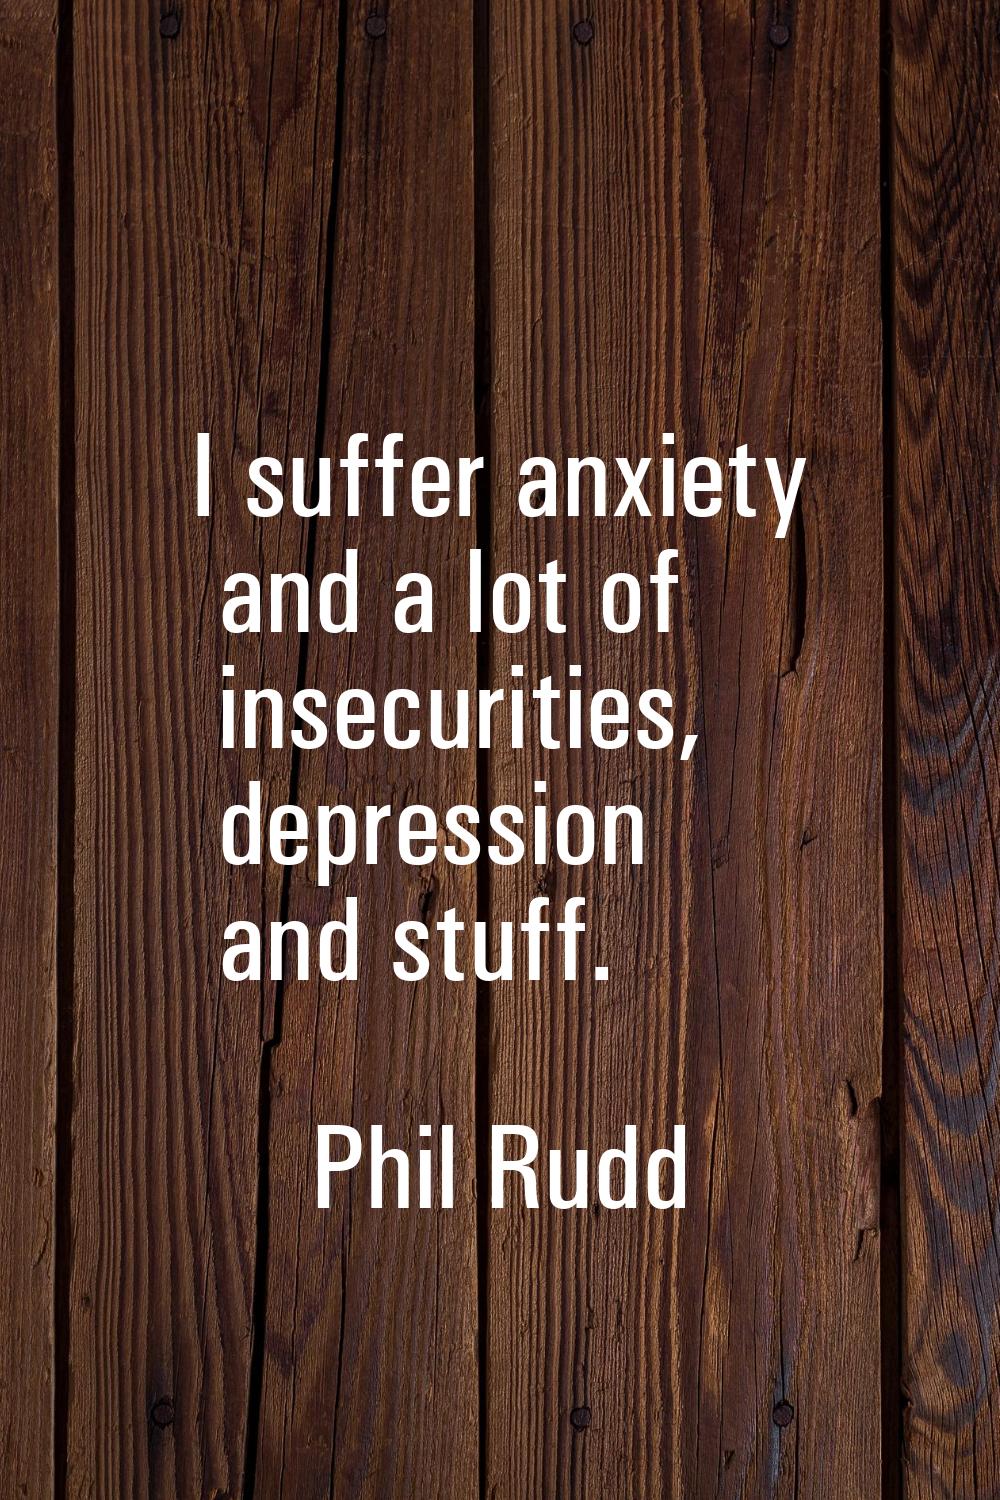 I suffer anxiety and a lot of insecurities, depression and stuff.